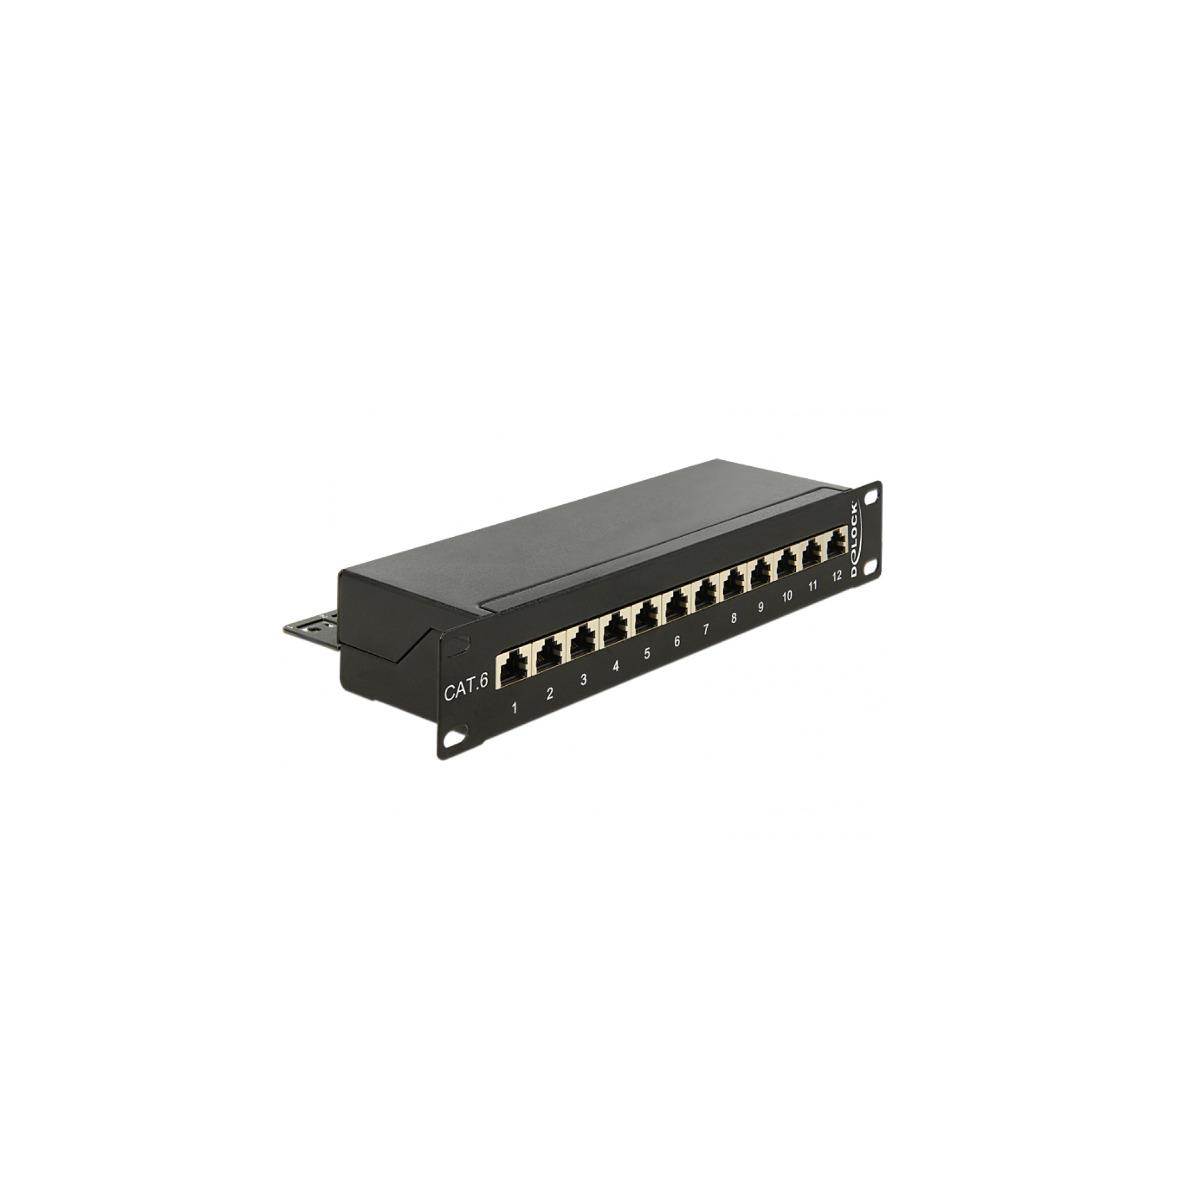 DELOCK Patchpanel 43297